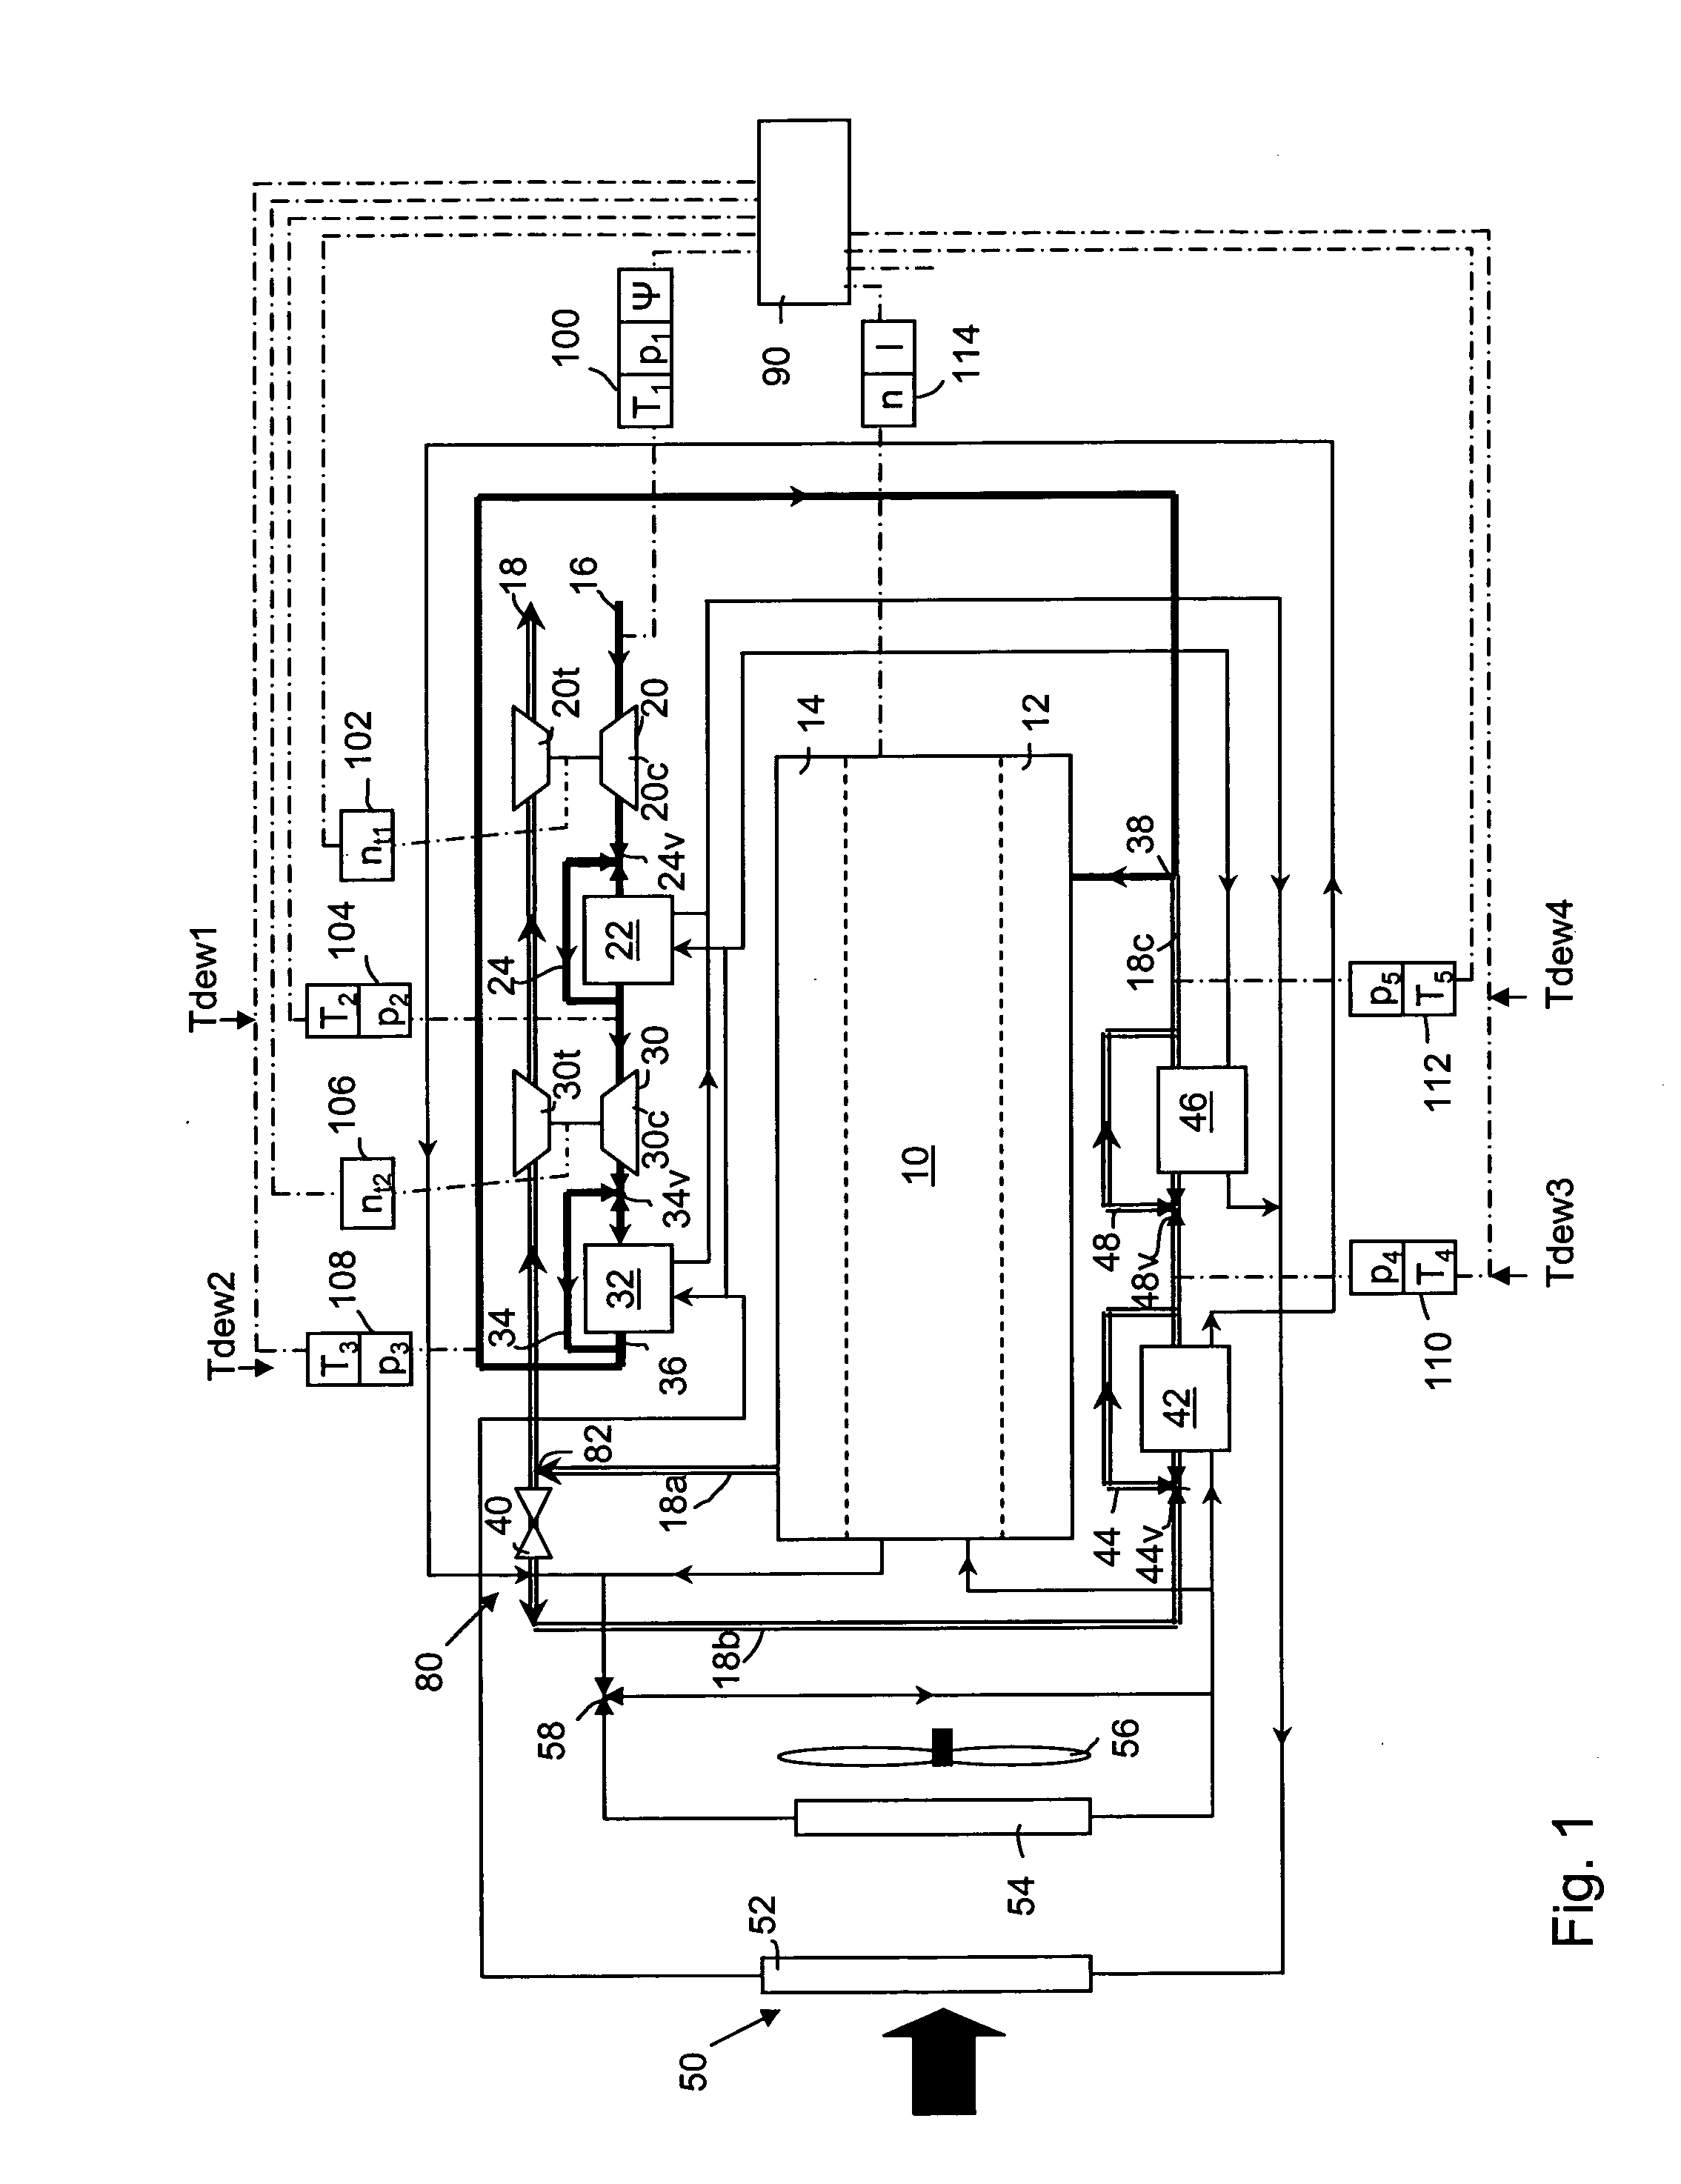 Charge air system and charge air operation method